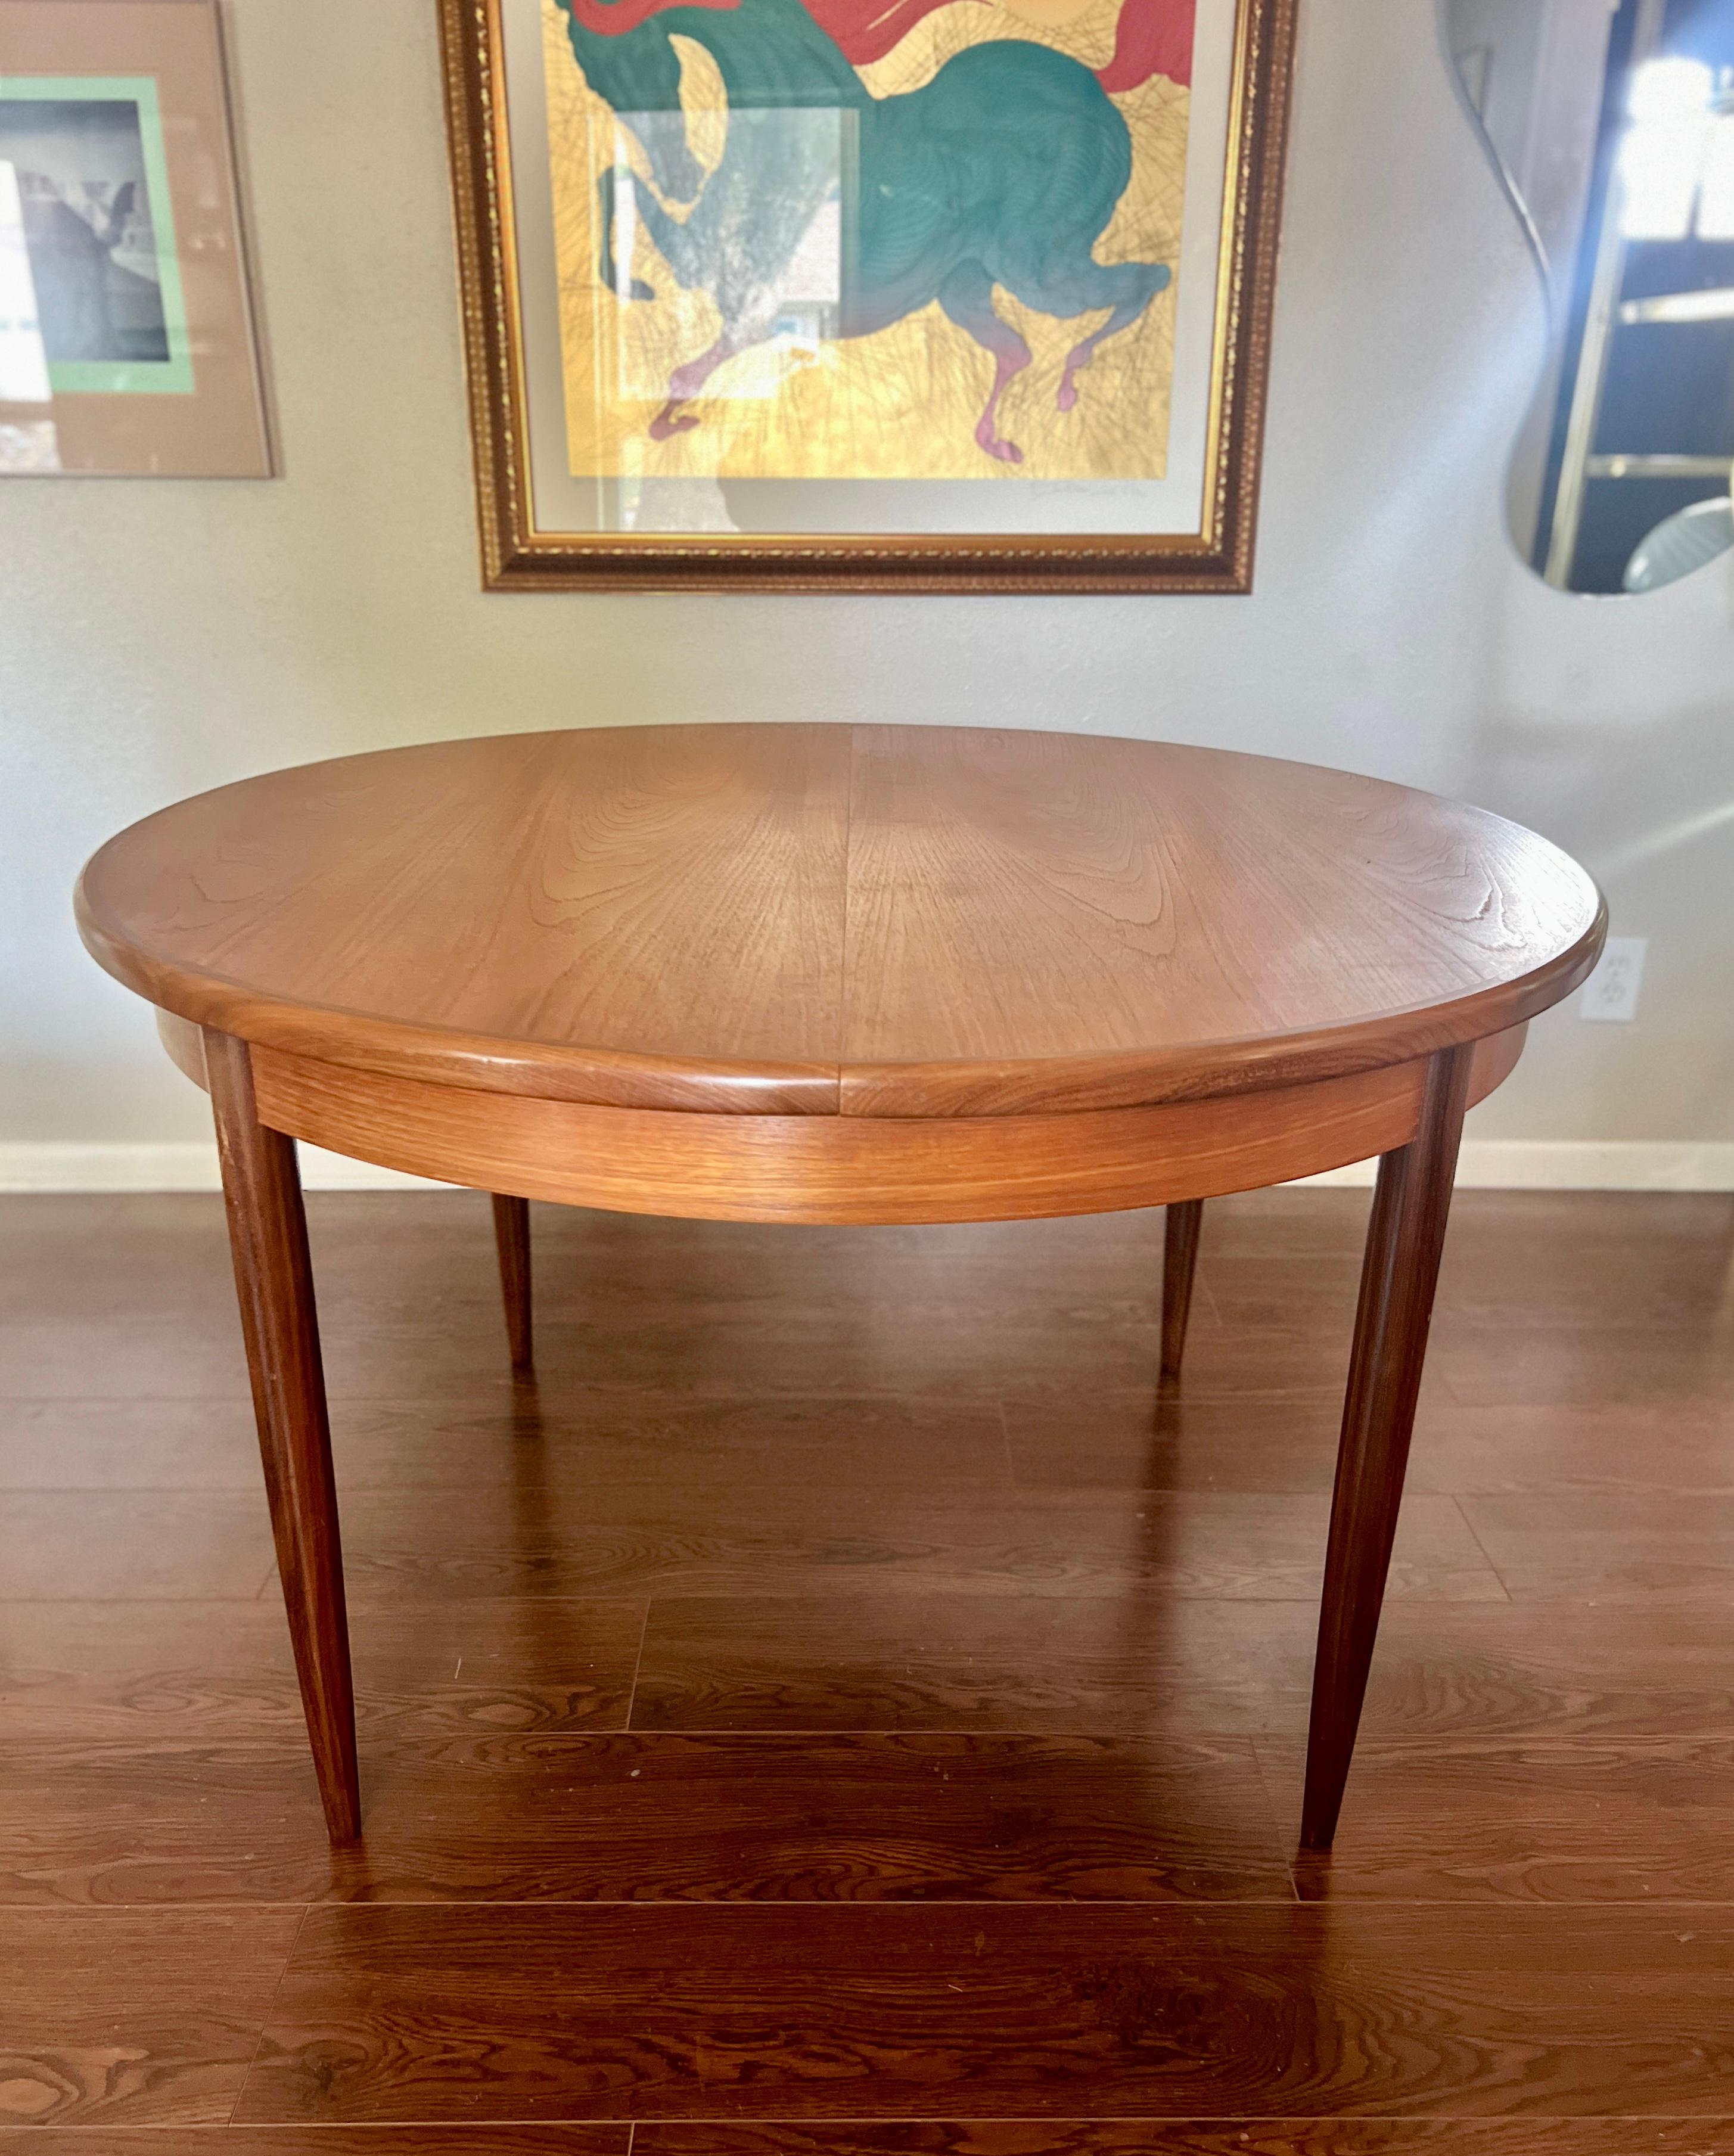 European A MCM round teak dining table by G plan, with one 18